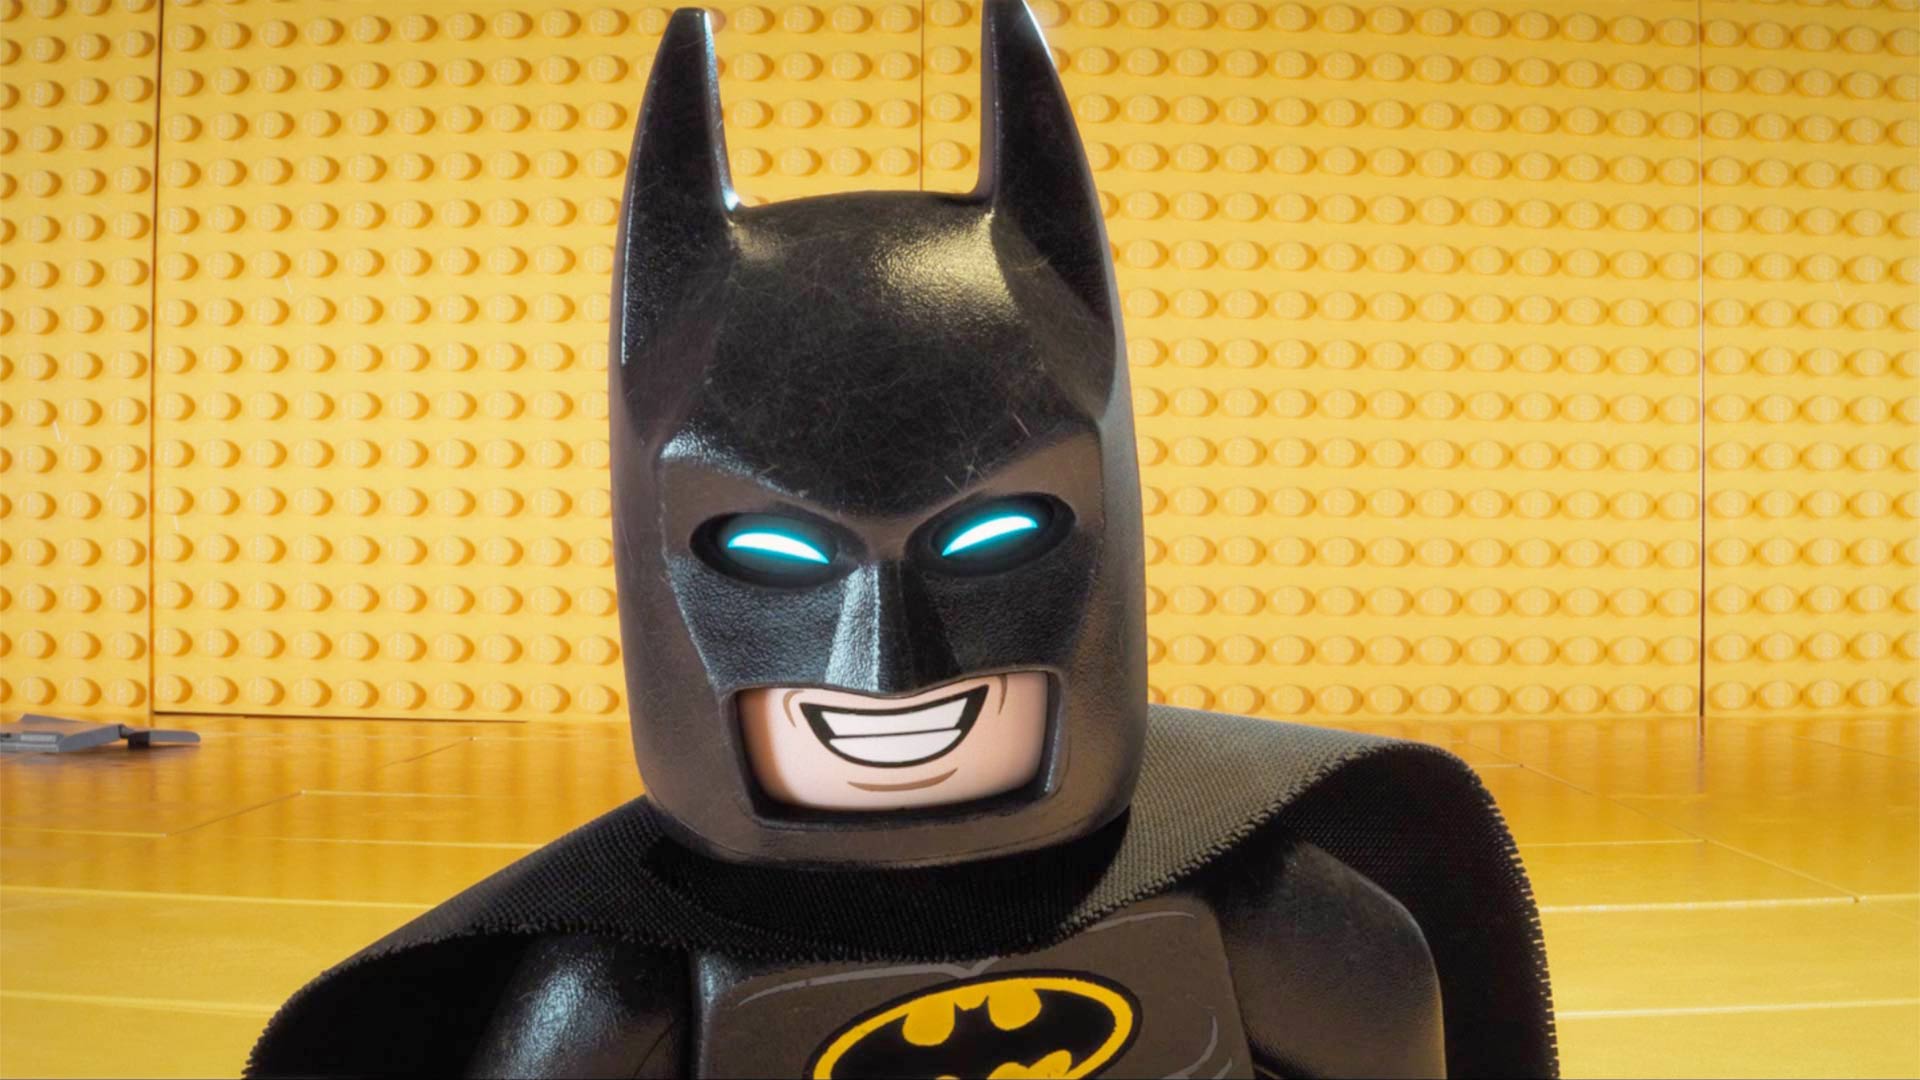 Review: Lego Batman builds upon extensive character history – THE